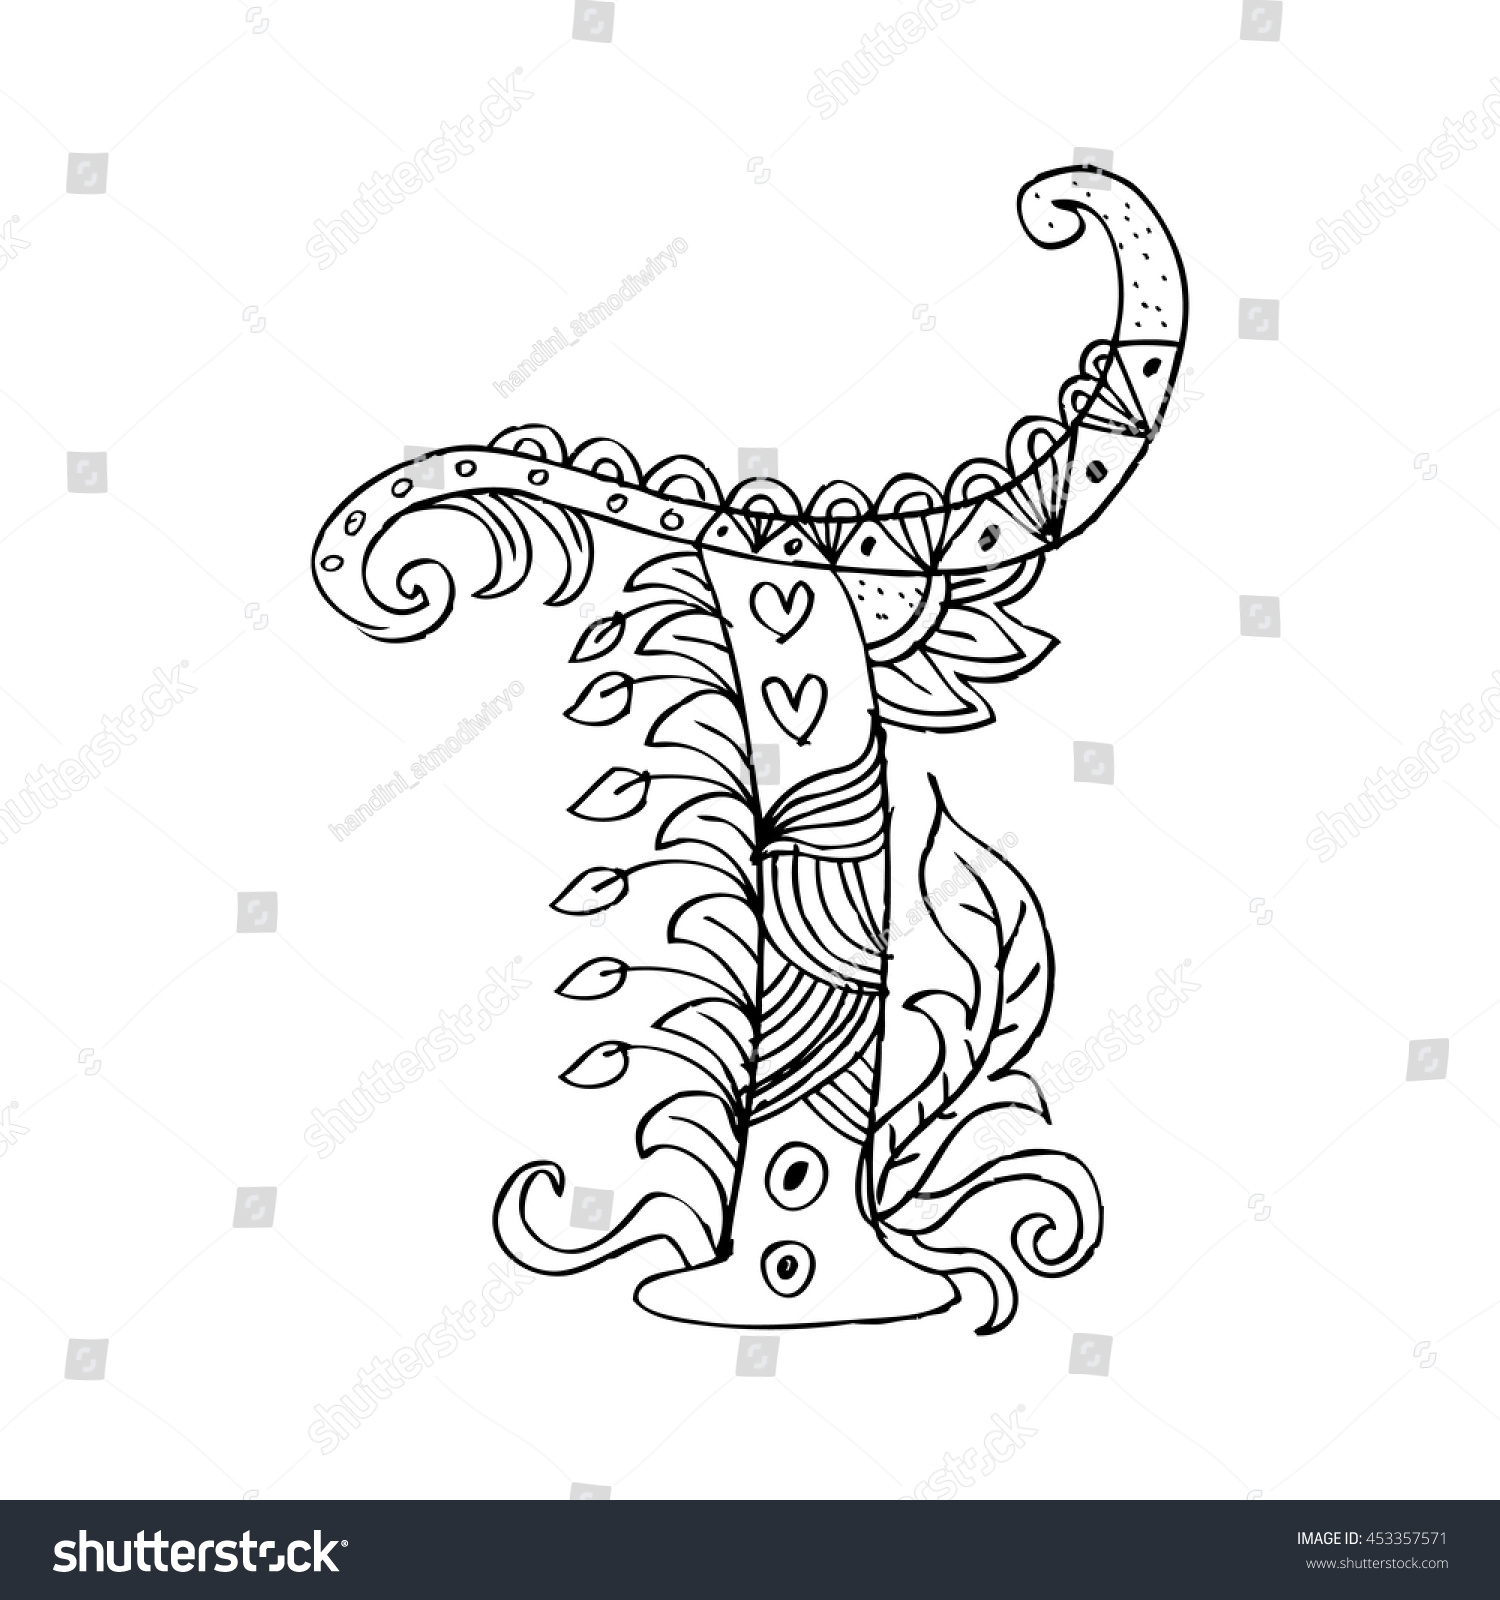 Zentangle Stylized Alphabet Lace Letter T Stock Vector Royalty Free